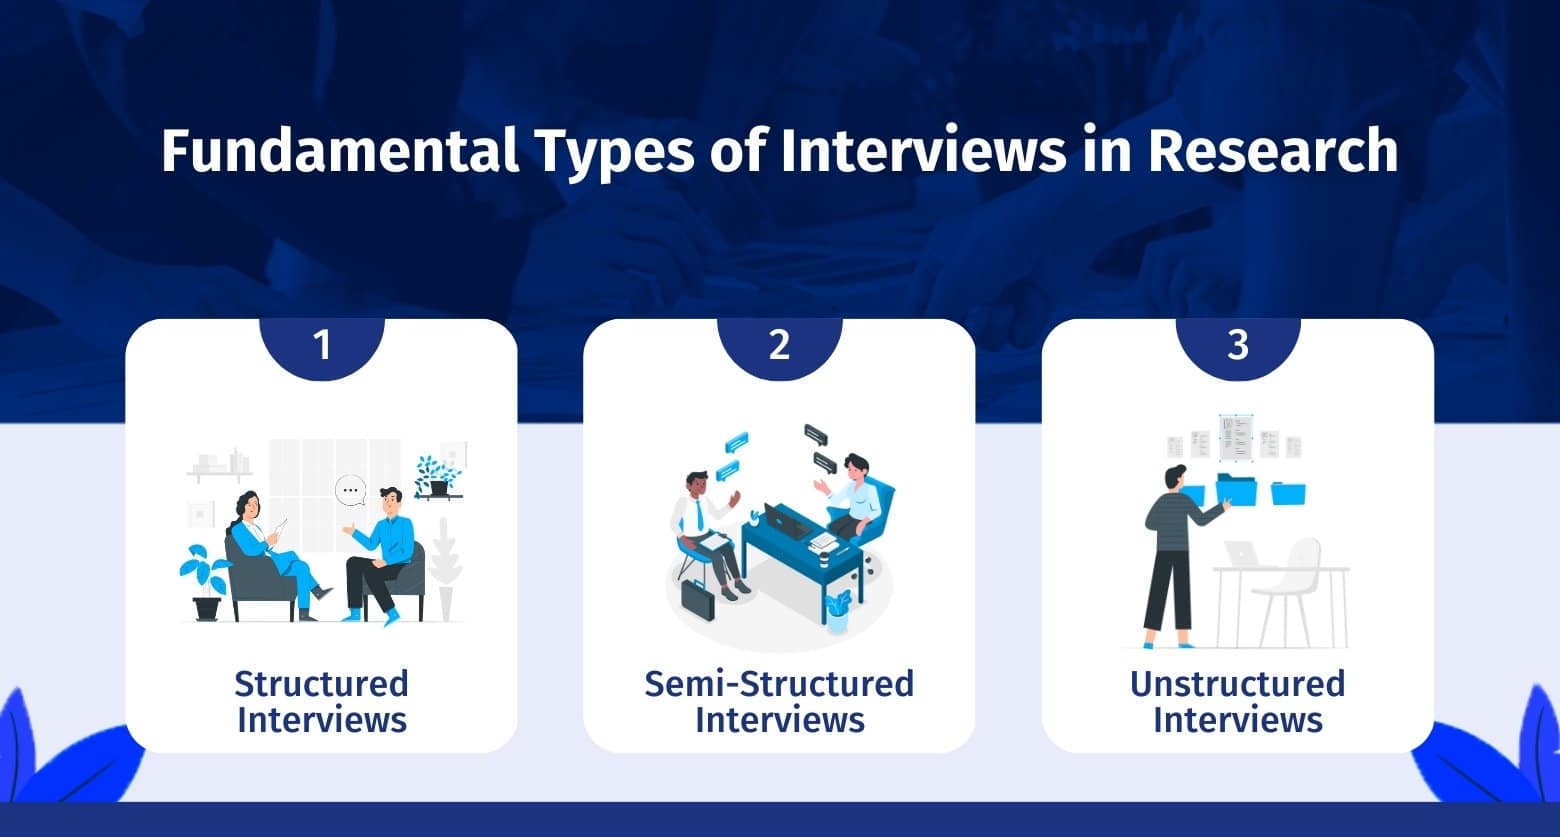 research interviews used for